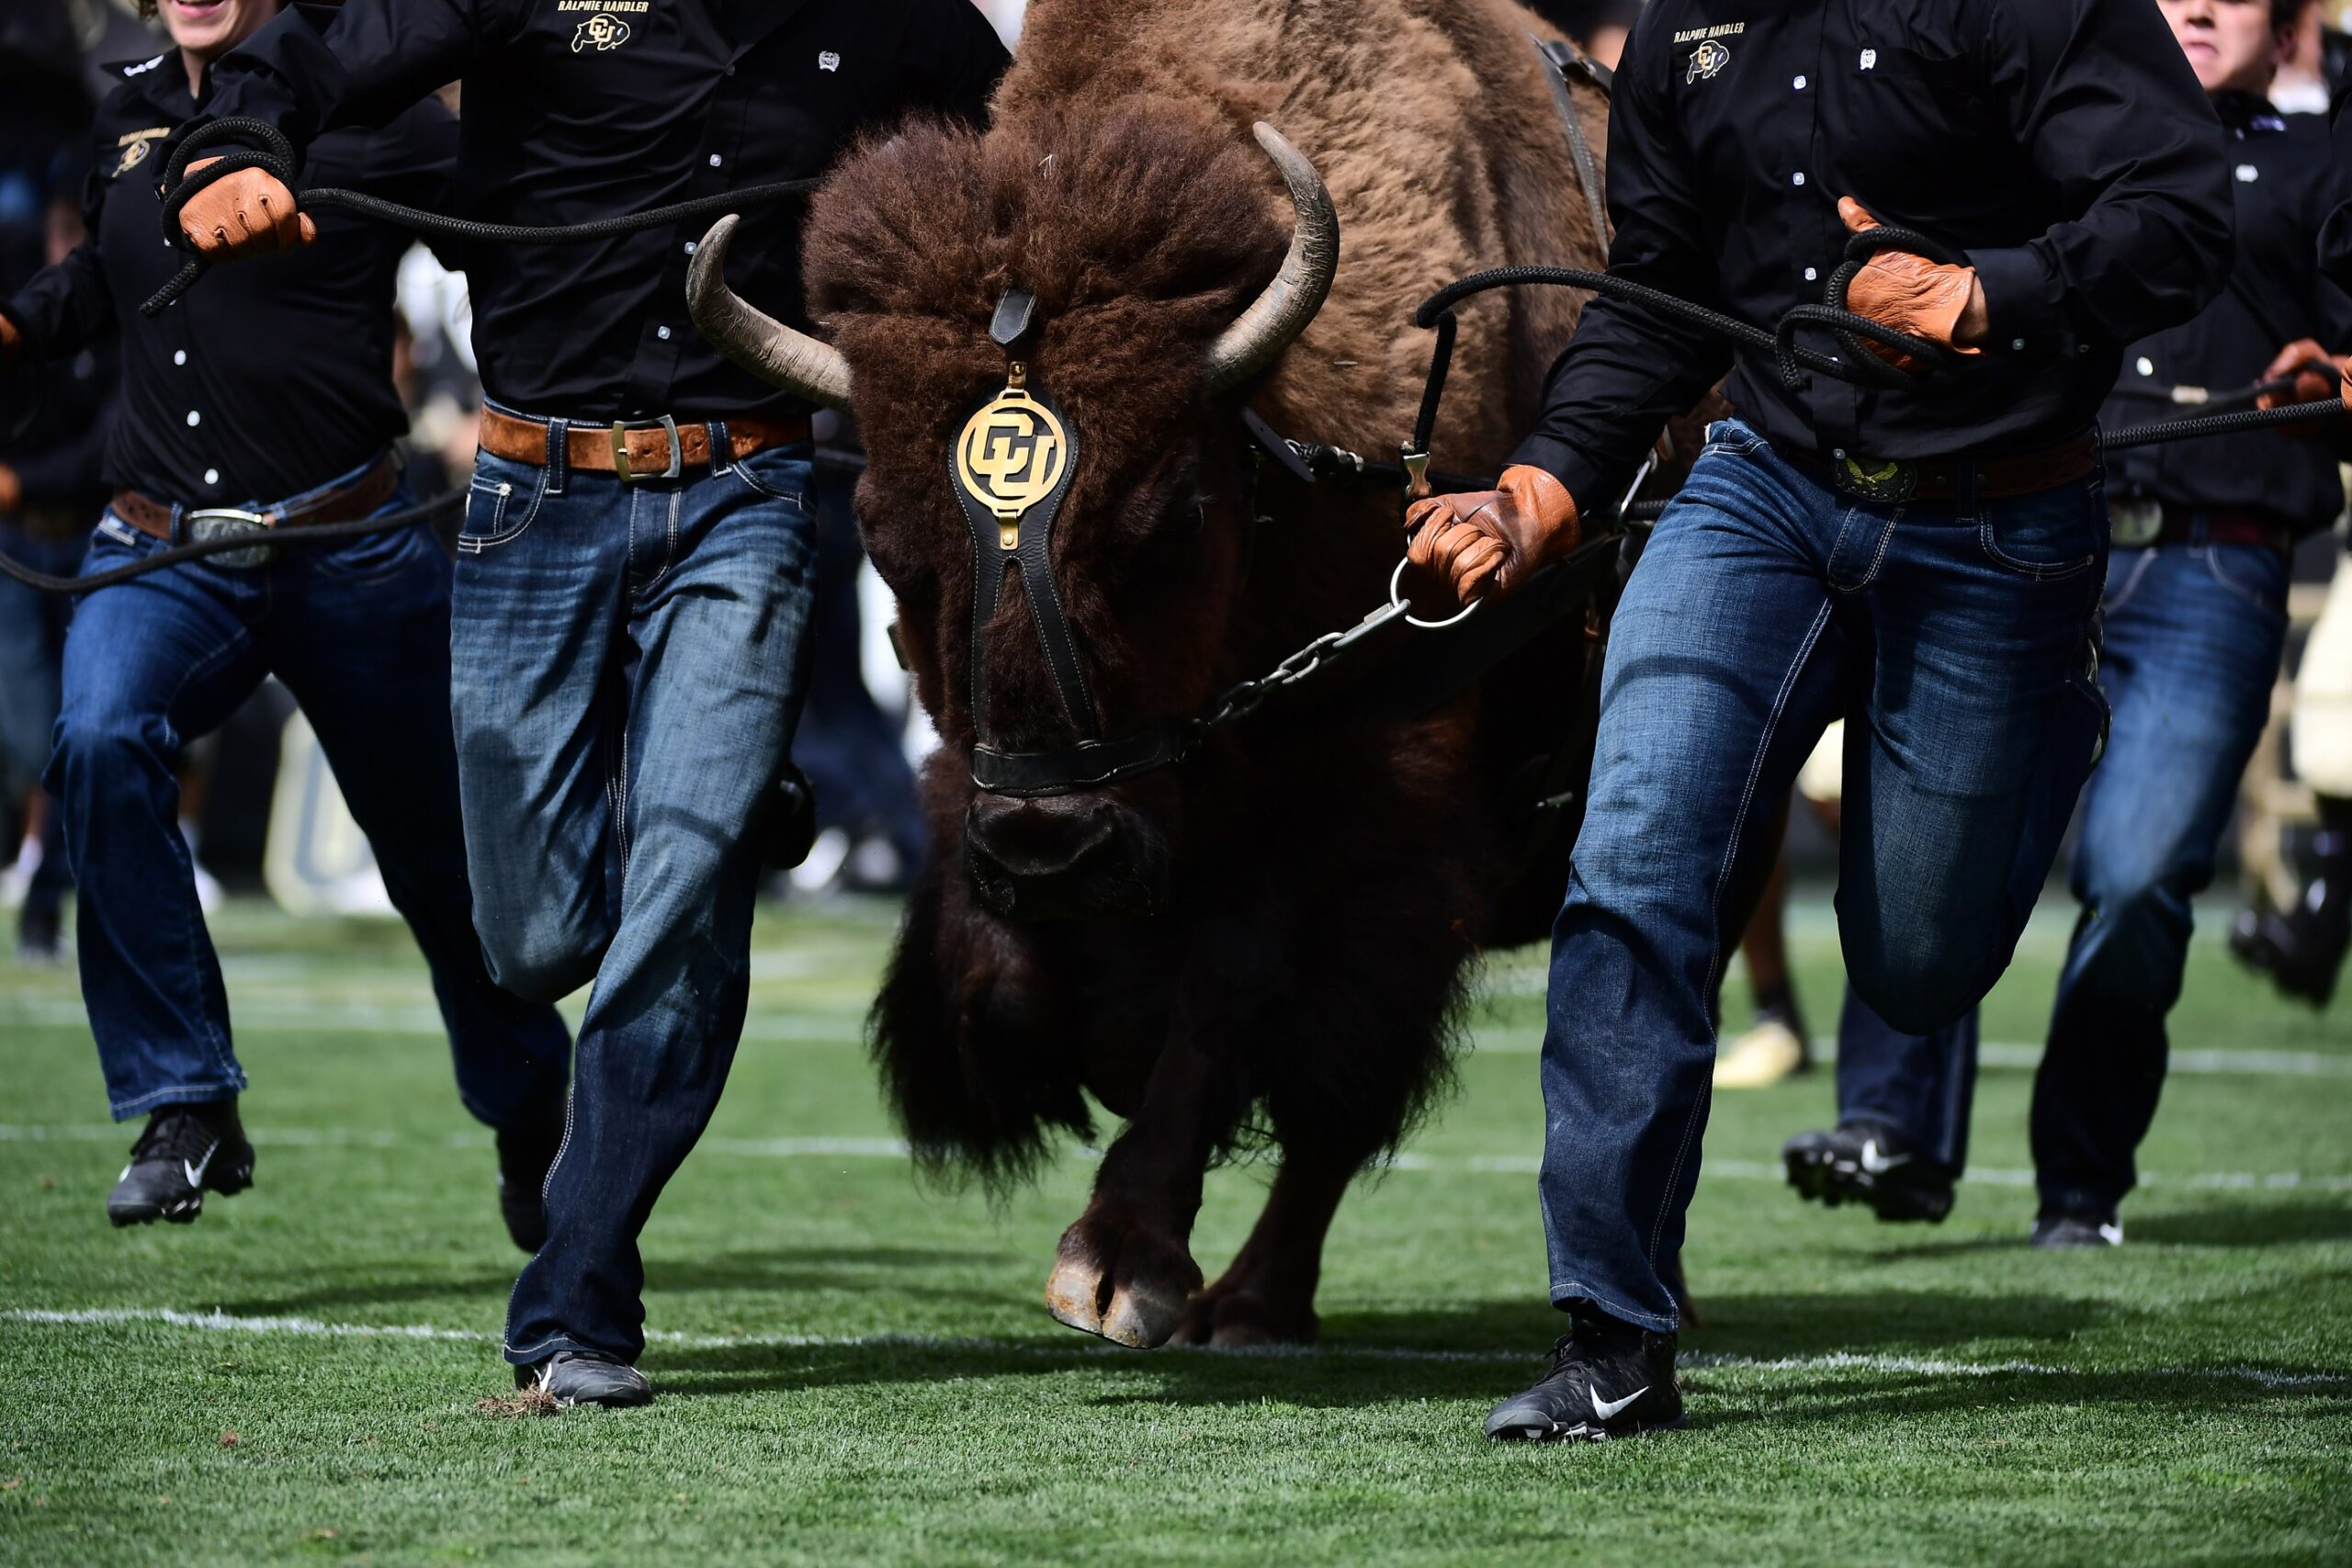 Colorado Buffaloes Football Uniforms: Past and Soon-to-Be Present - The  Ralphie Report